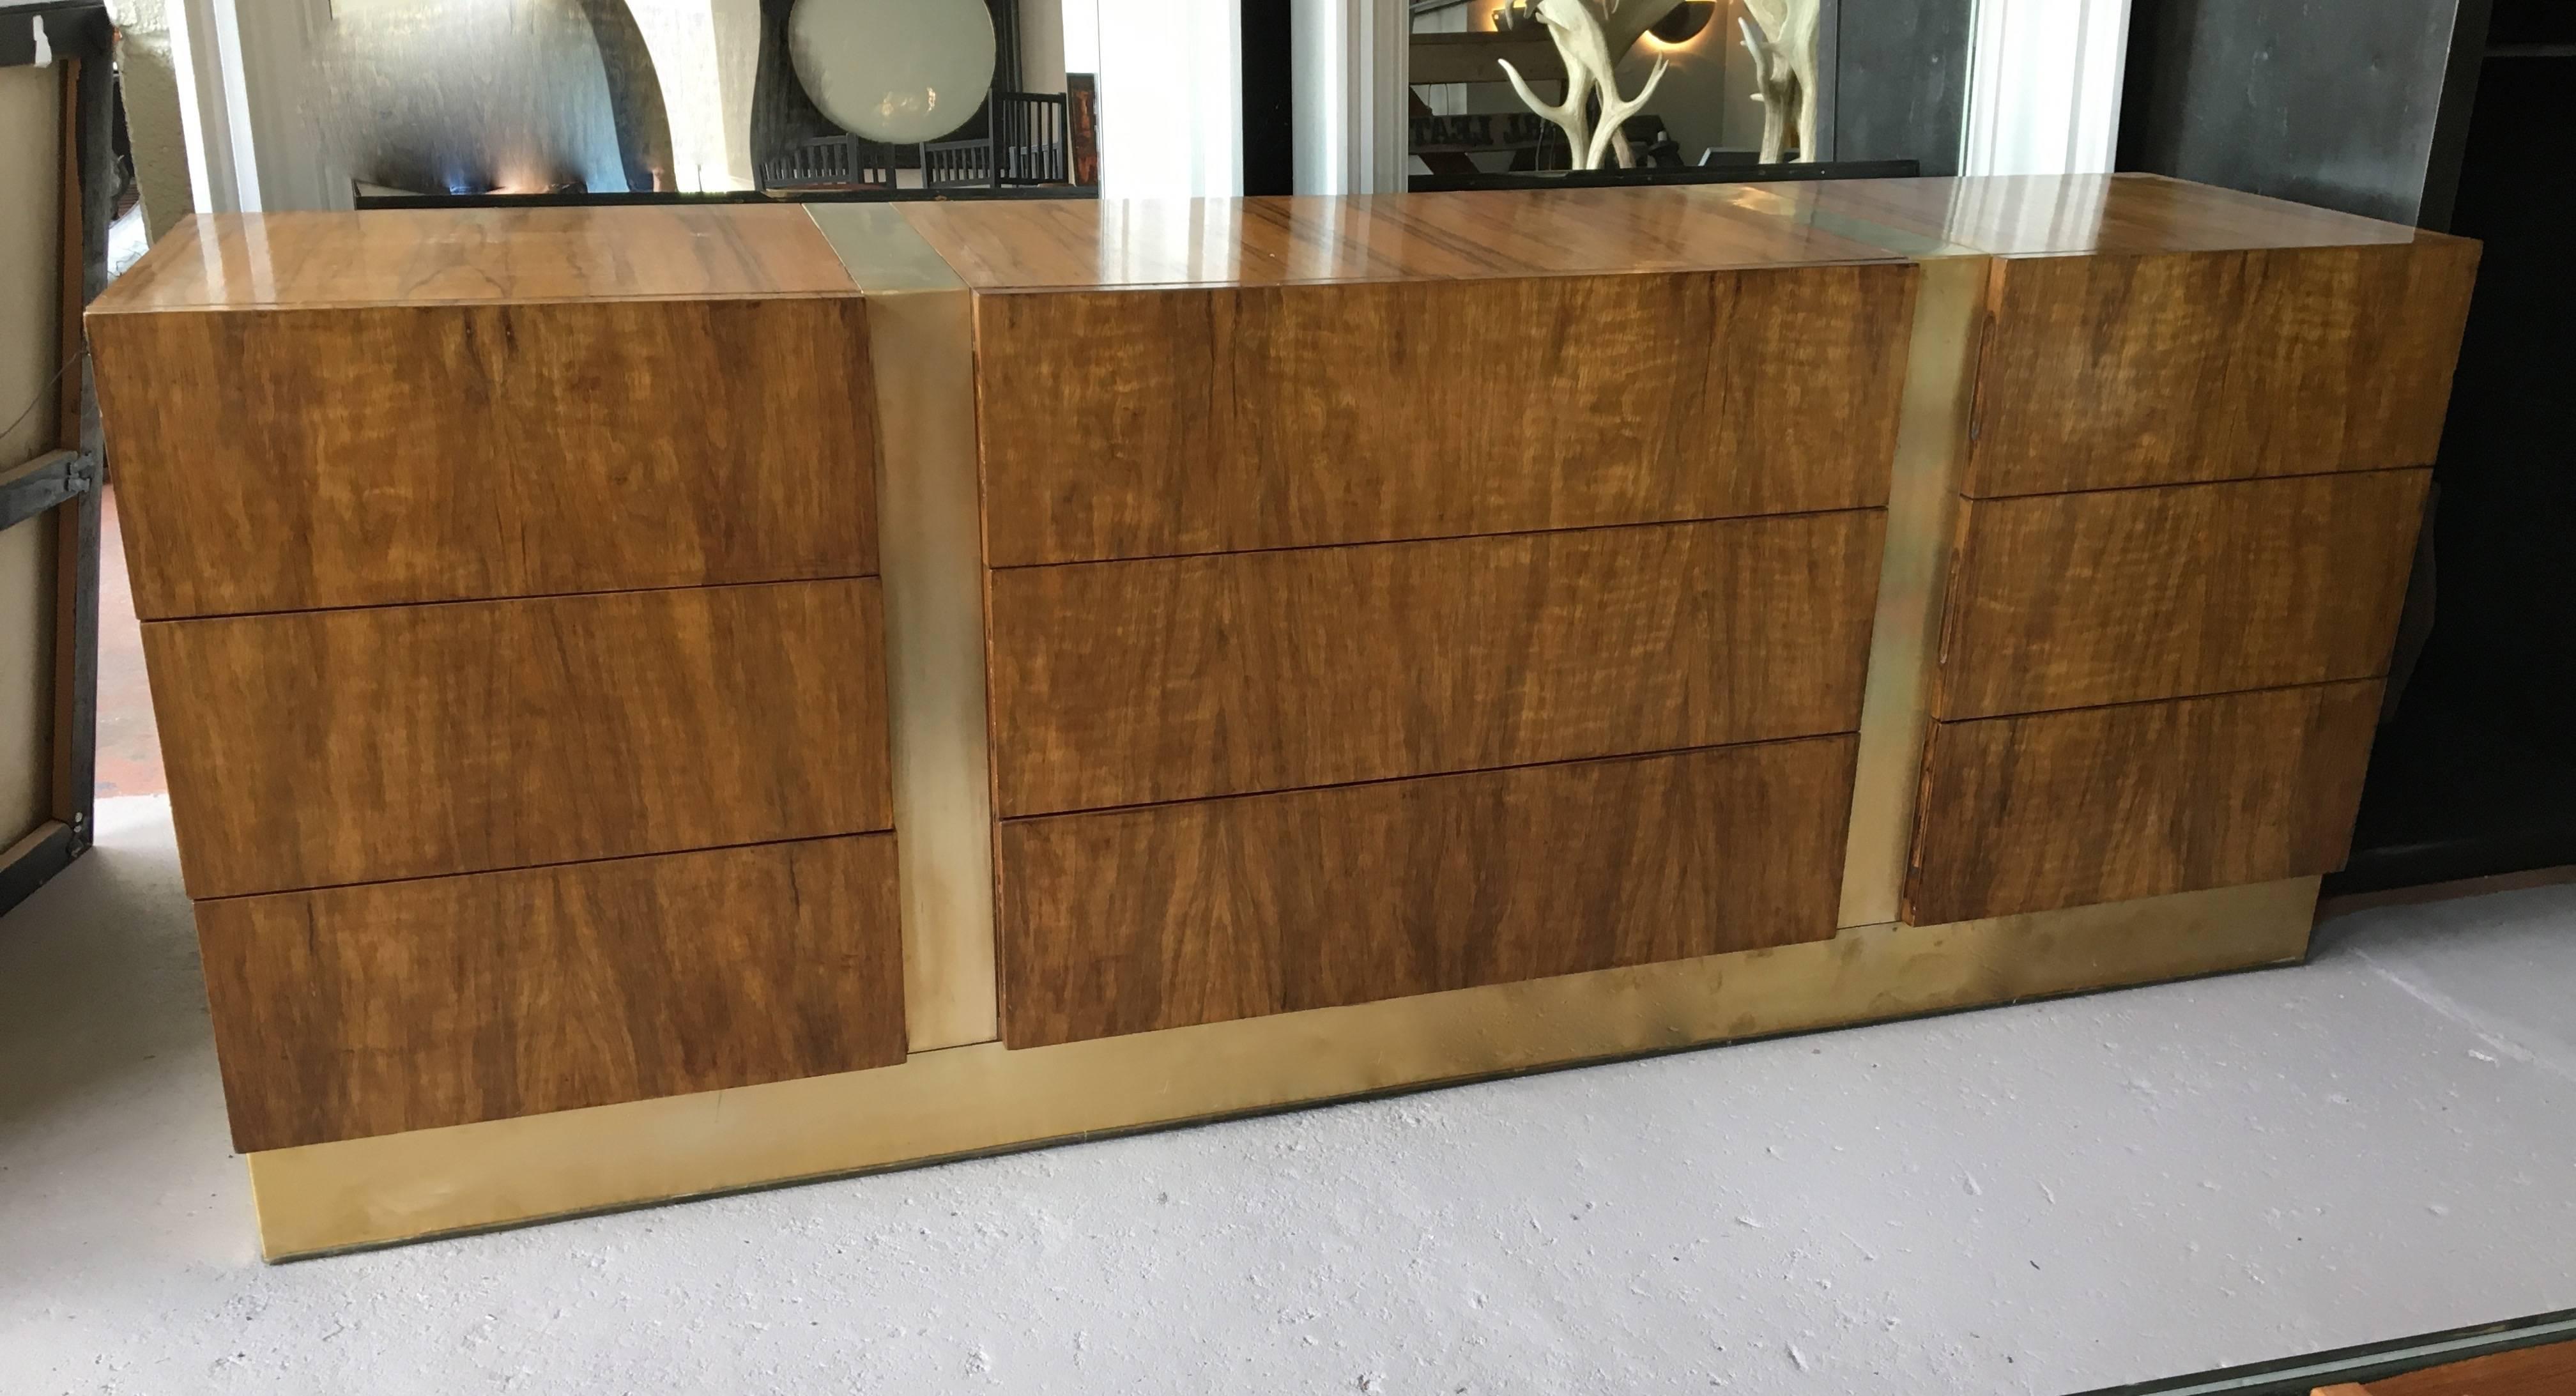 Versatile rosewood credenza with brass banding, featuring all drawers; a total of nine drawers, retaining original maker label.

Avantgarden Ltd. cultivates unexpected and exceptional lighting, furniture and design. To view items in person please